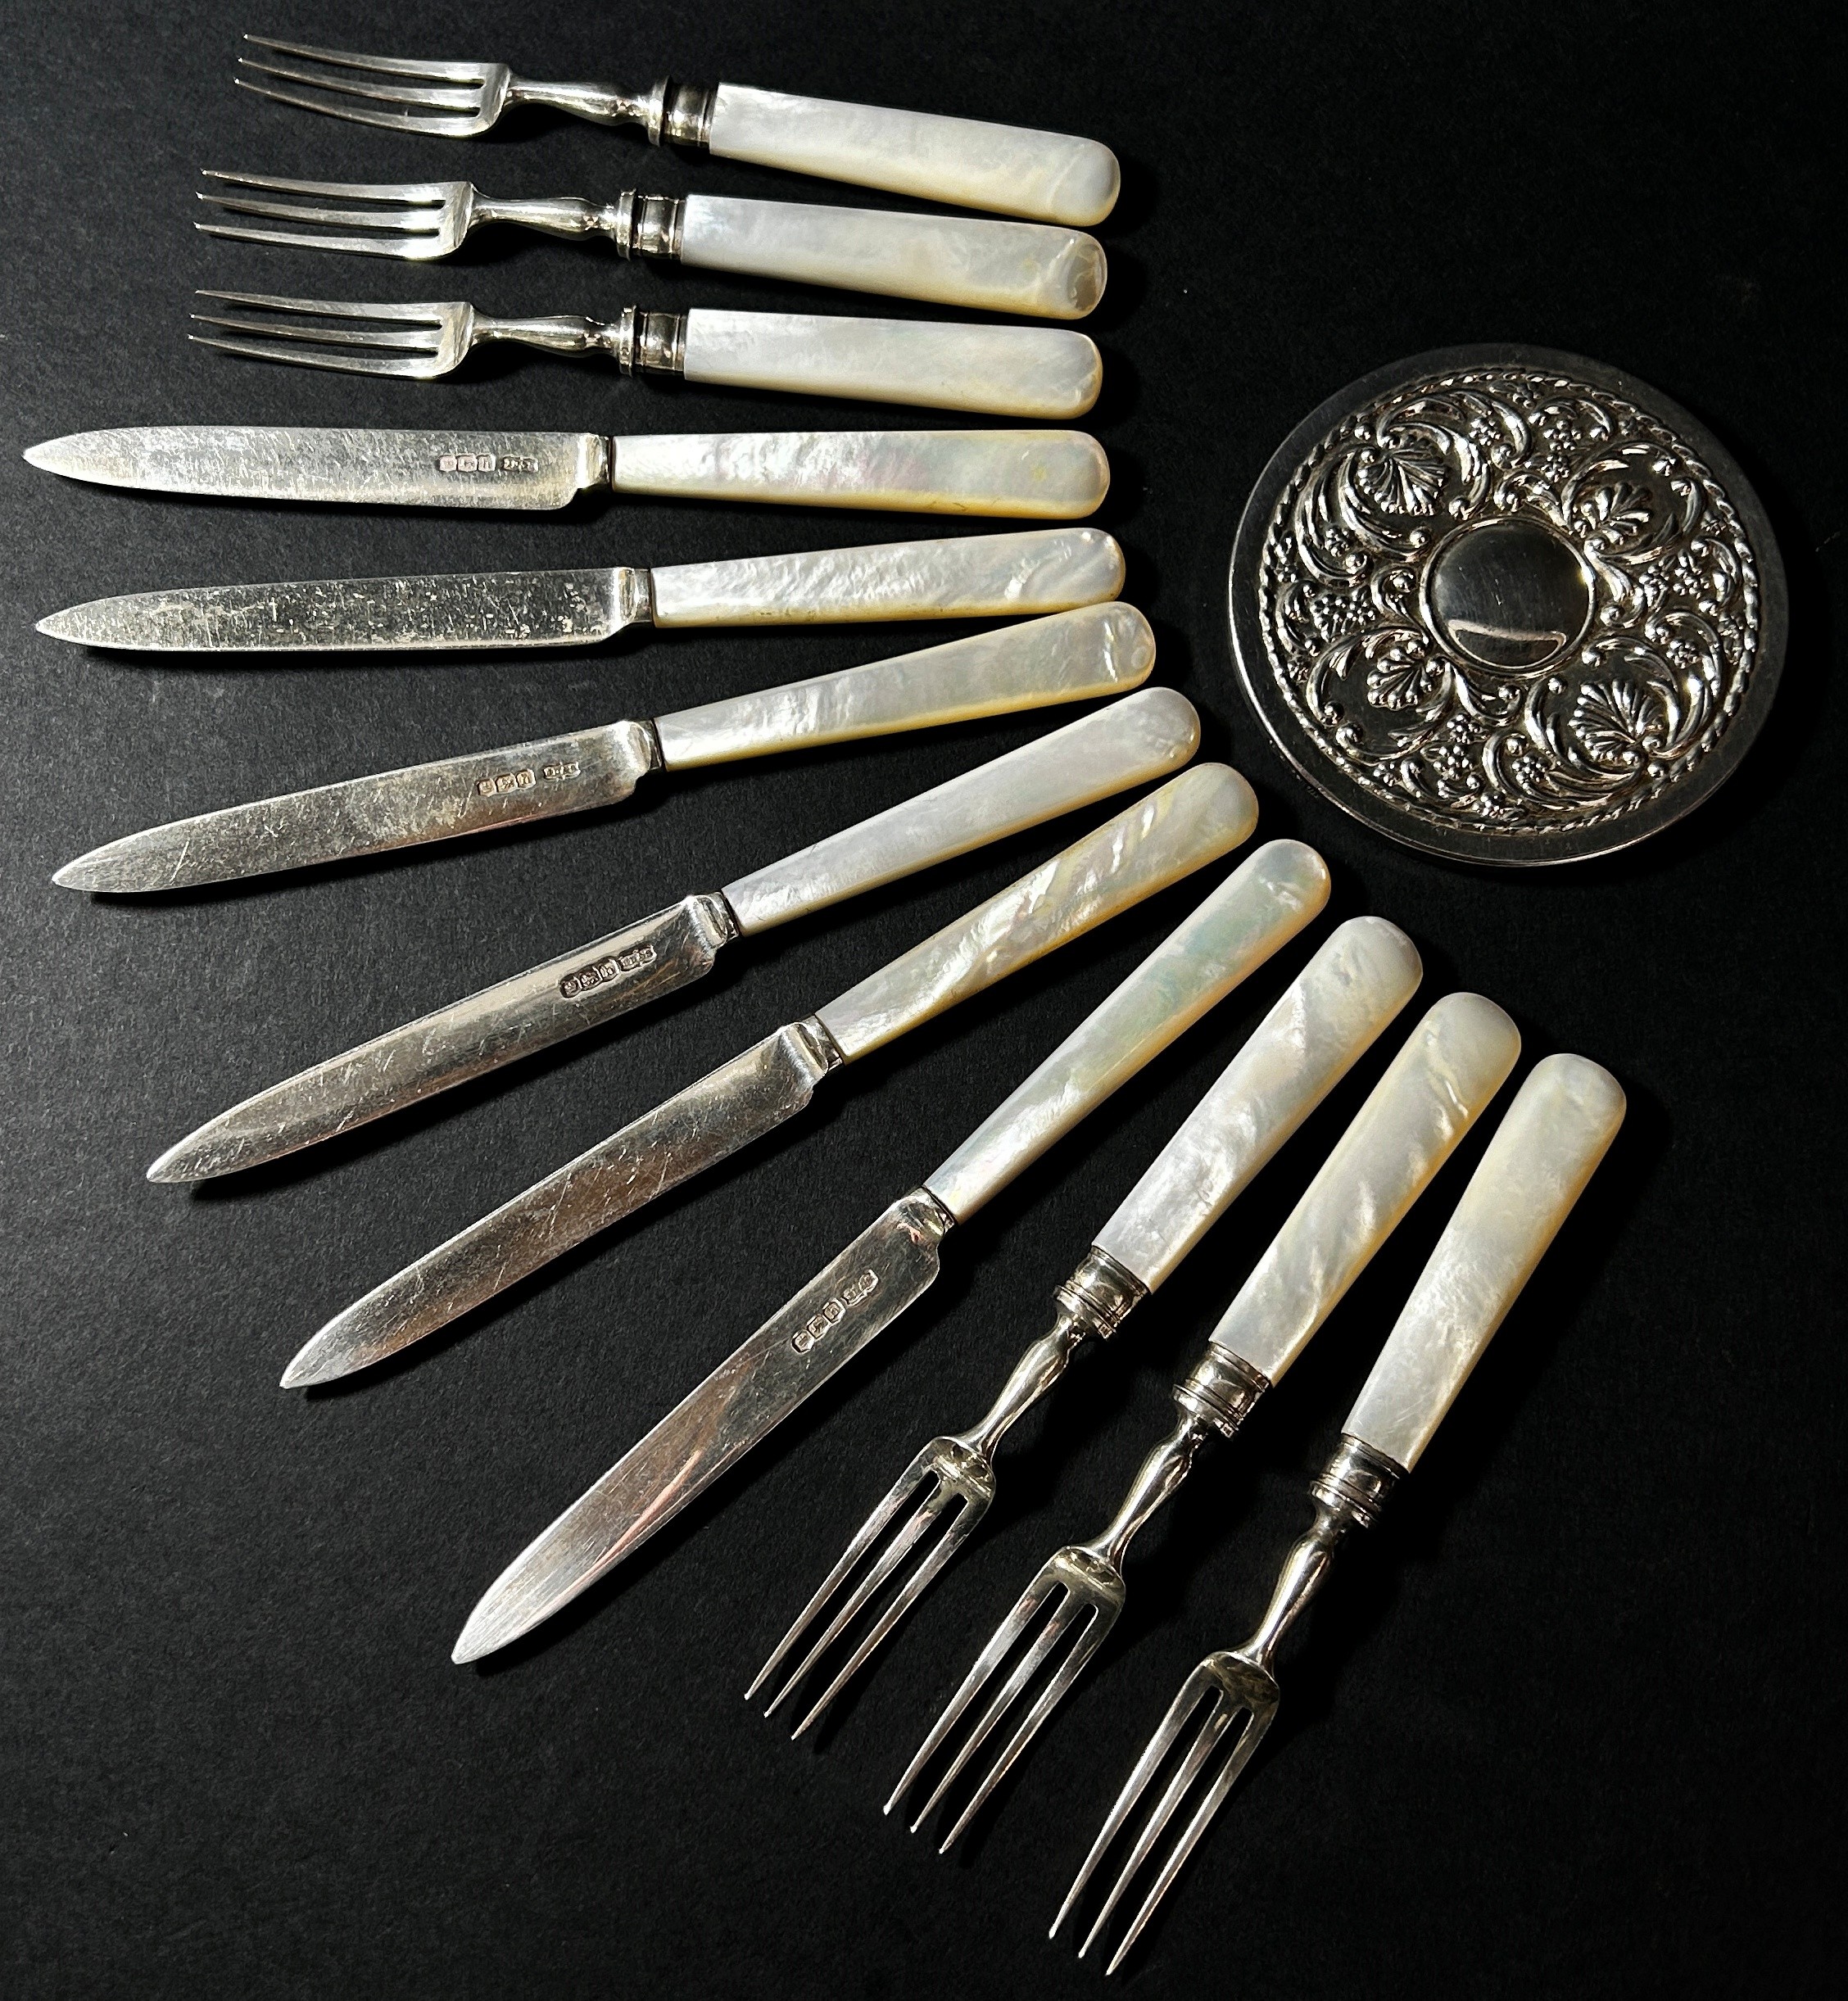 A Harrods mother of pearl set of silver fruit knives and forks and a small silver pocket mirror.